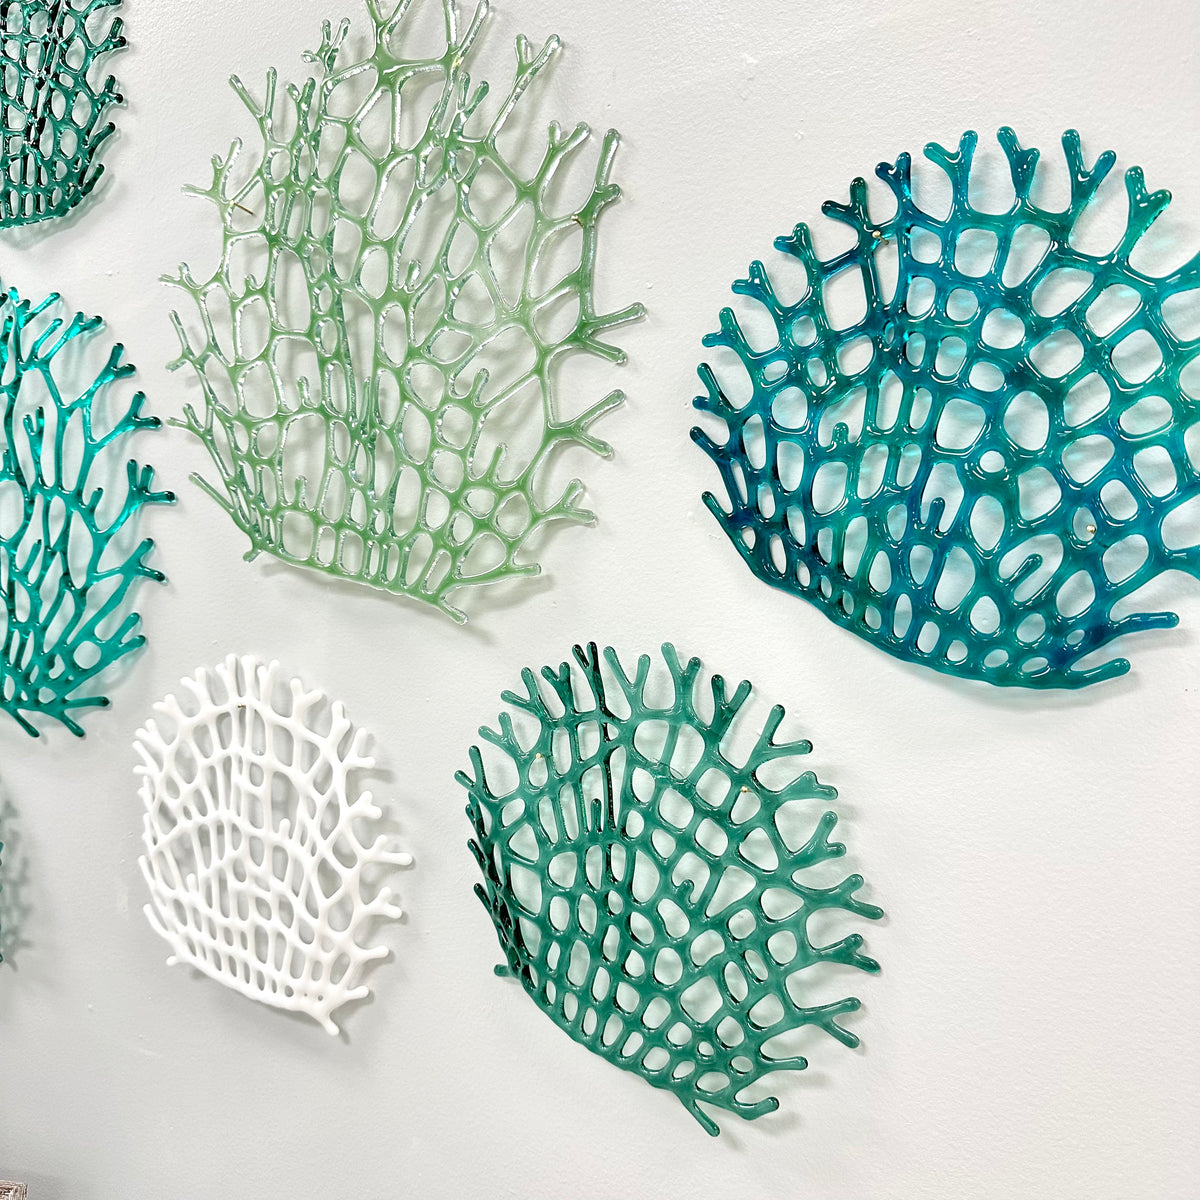 Assorted Glass Coral Wall Decor